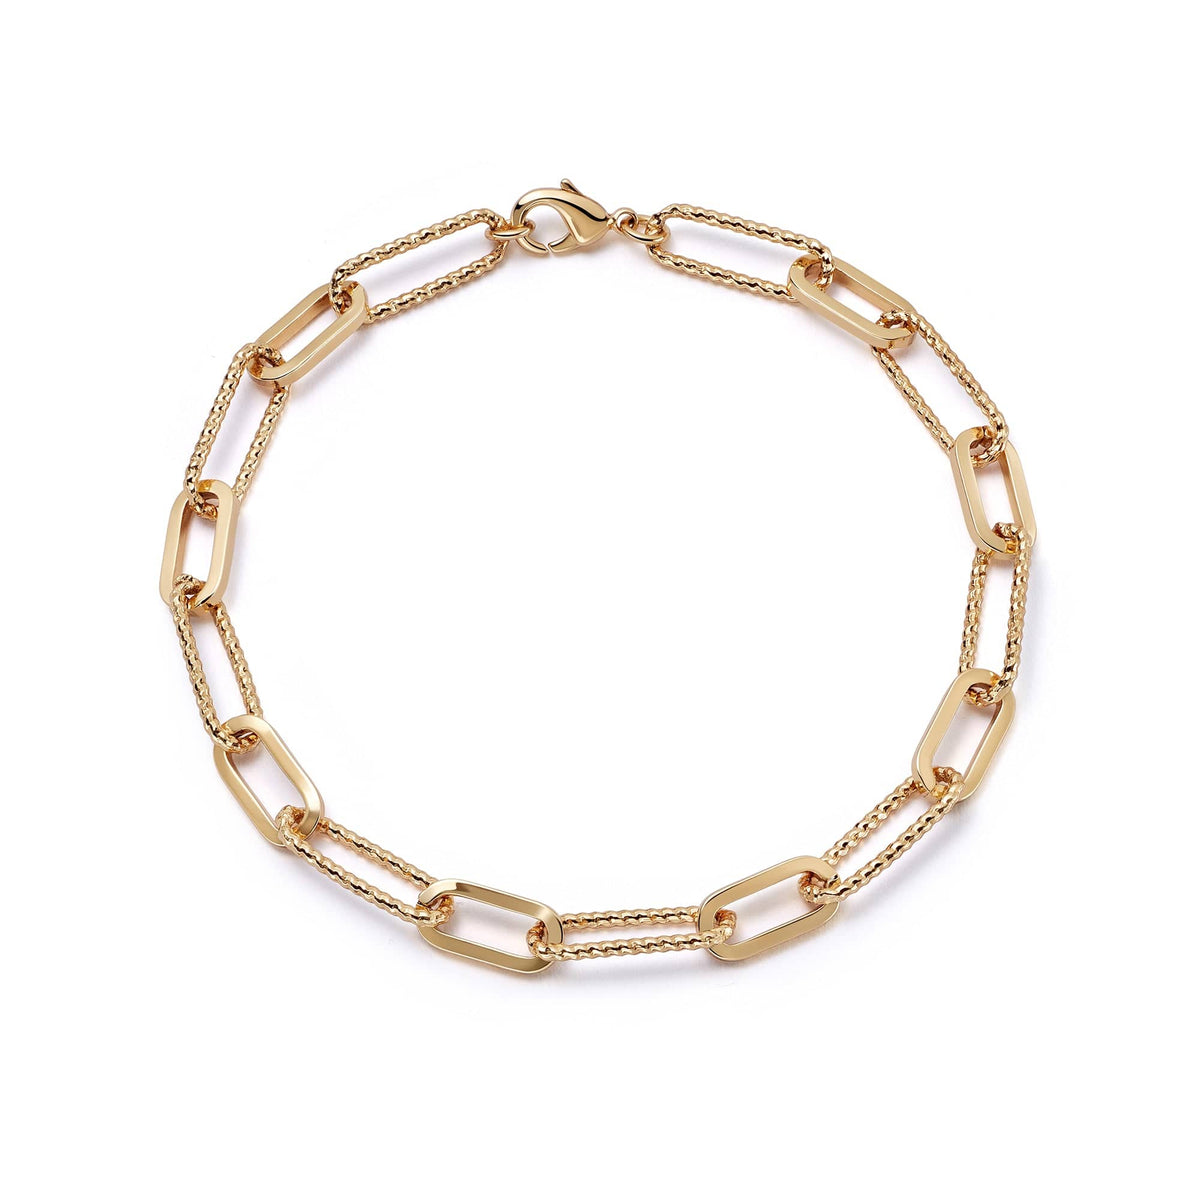 Polly Sayer Paperclip Chain Bracelet 18ct Gold Plate – Daisy London